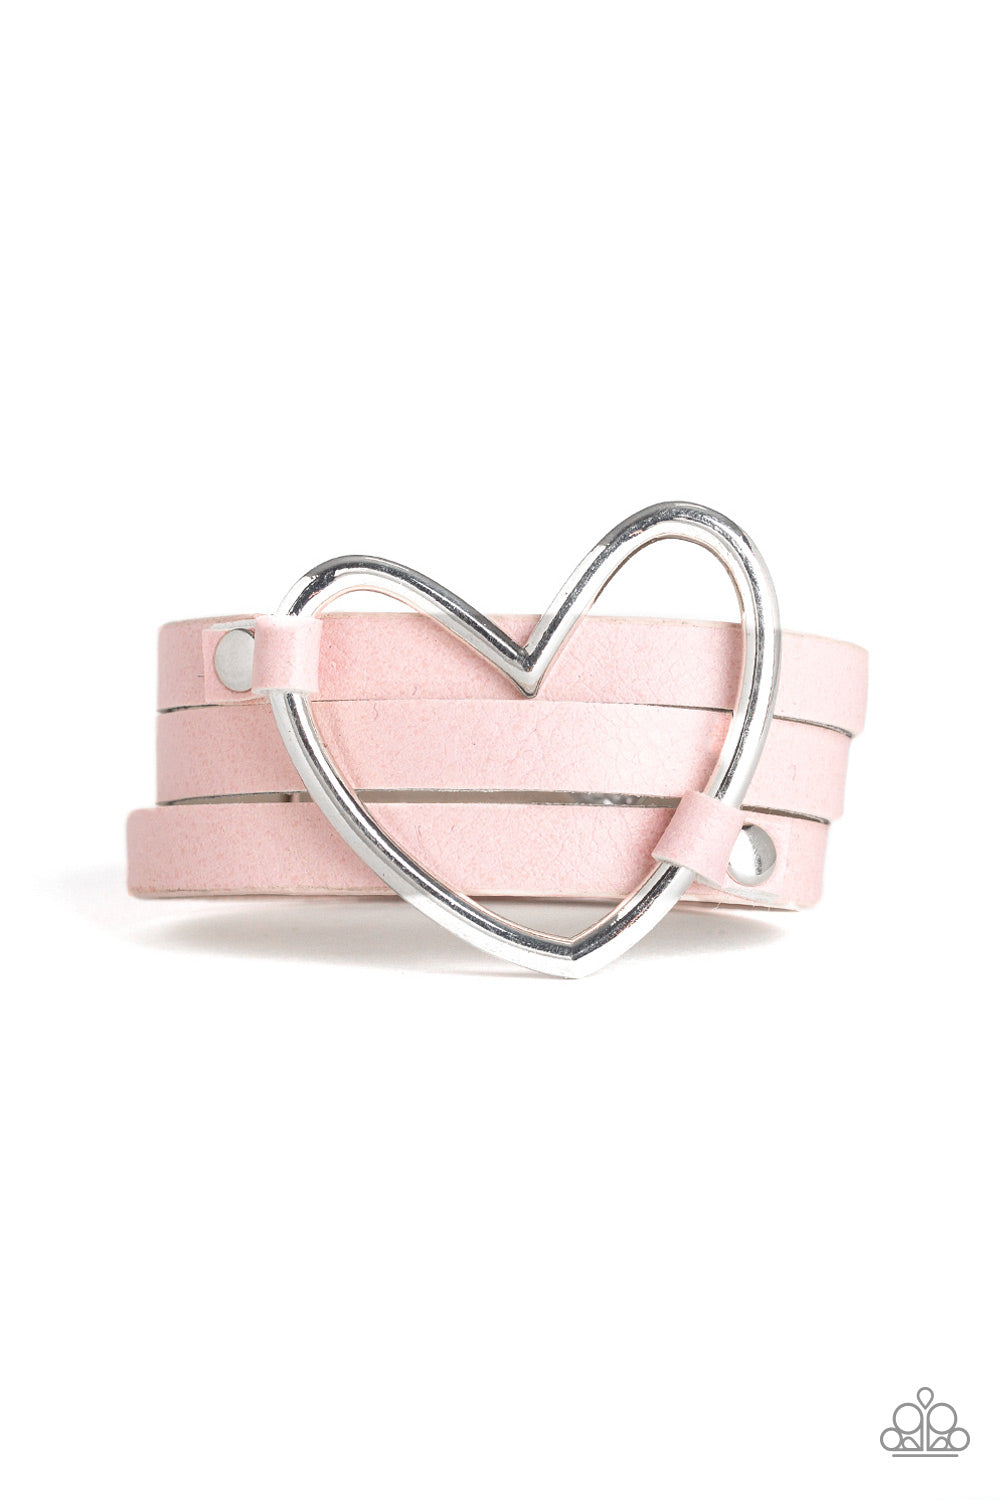 Paparazzi Accessories - One Love, One Heart - Pink